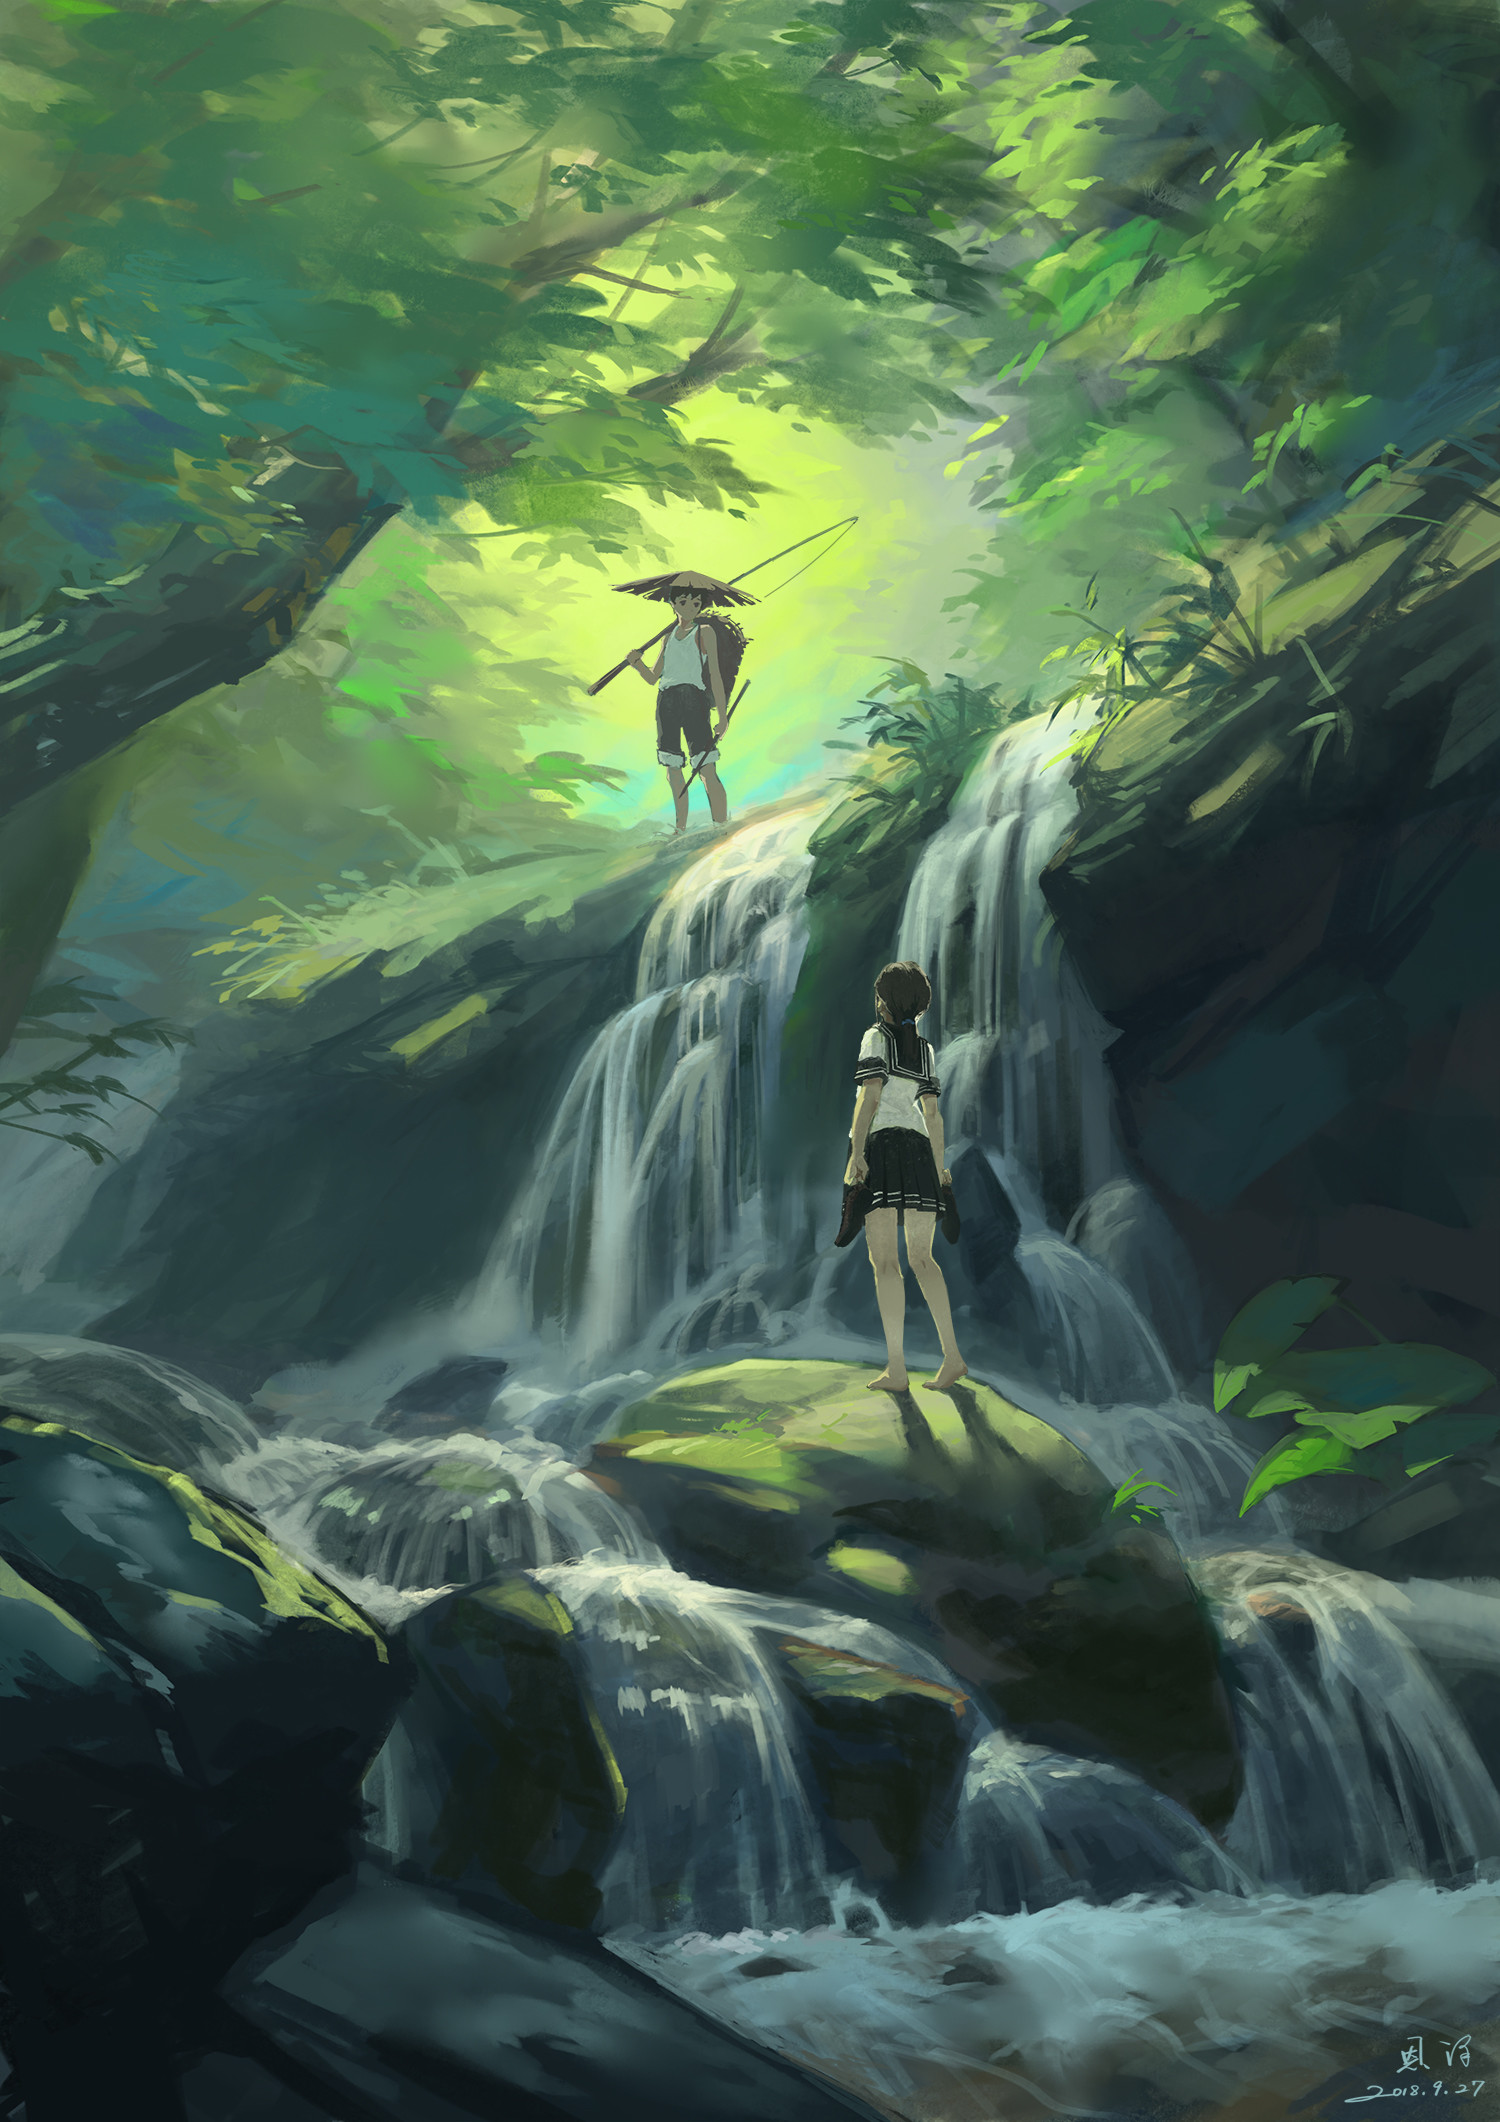 66145 download wallpaper forest, art, waterfall, girl, guy, jungle screensavers and pictures for free